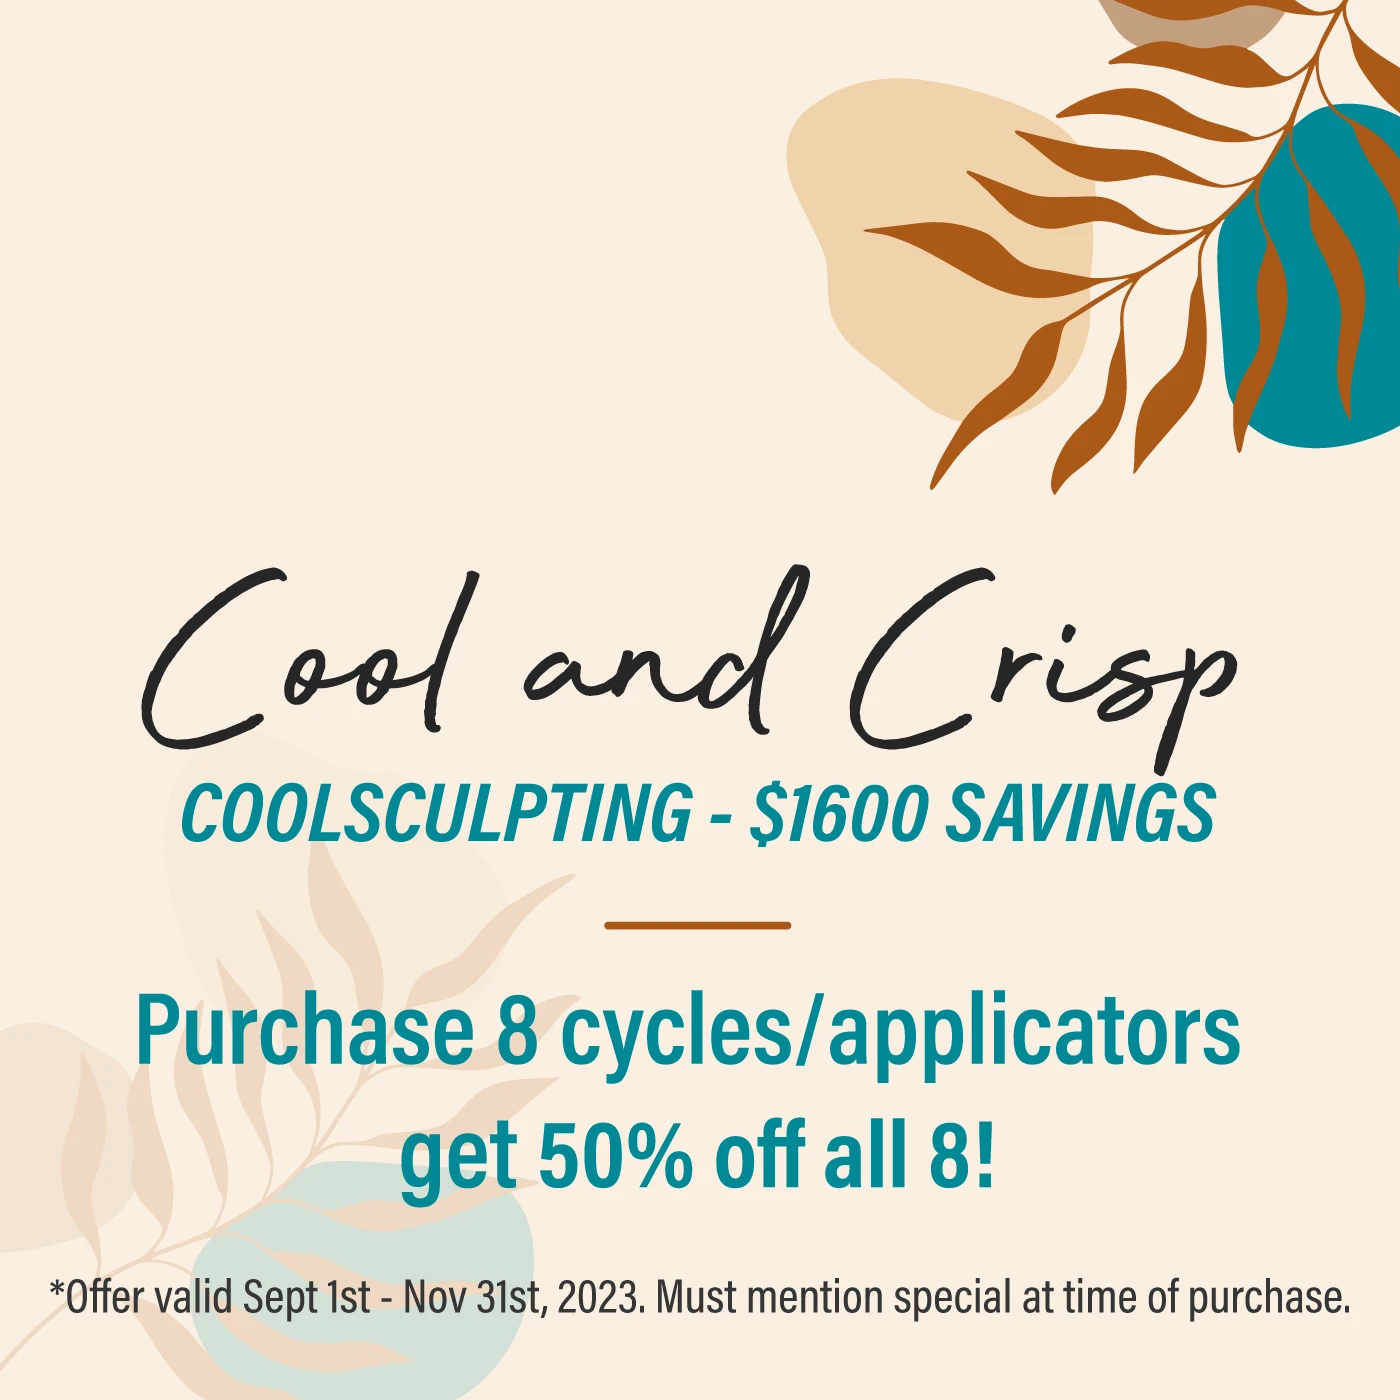 Cool and Crisp: Special Coolsculpting Offer